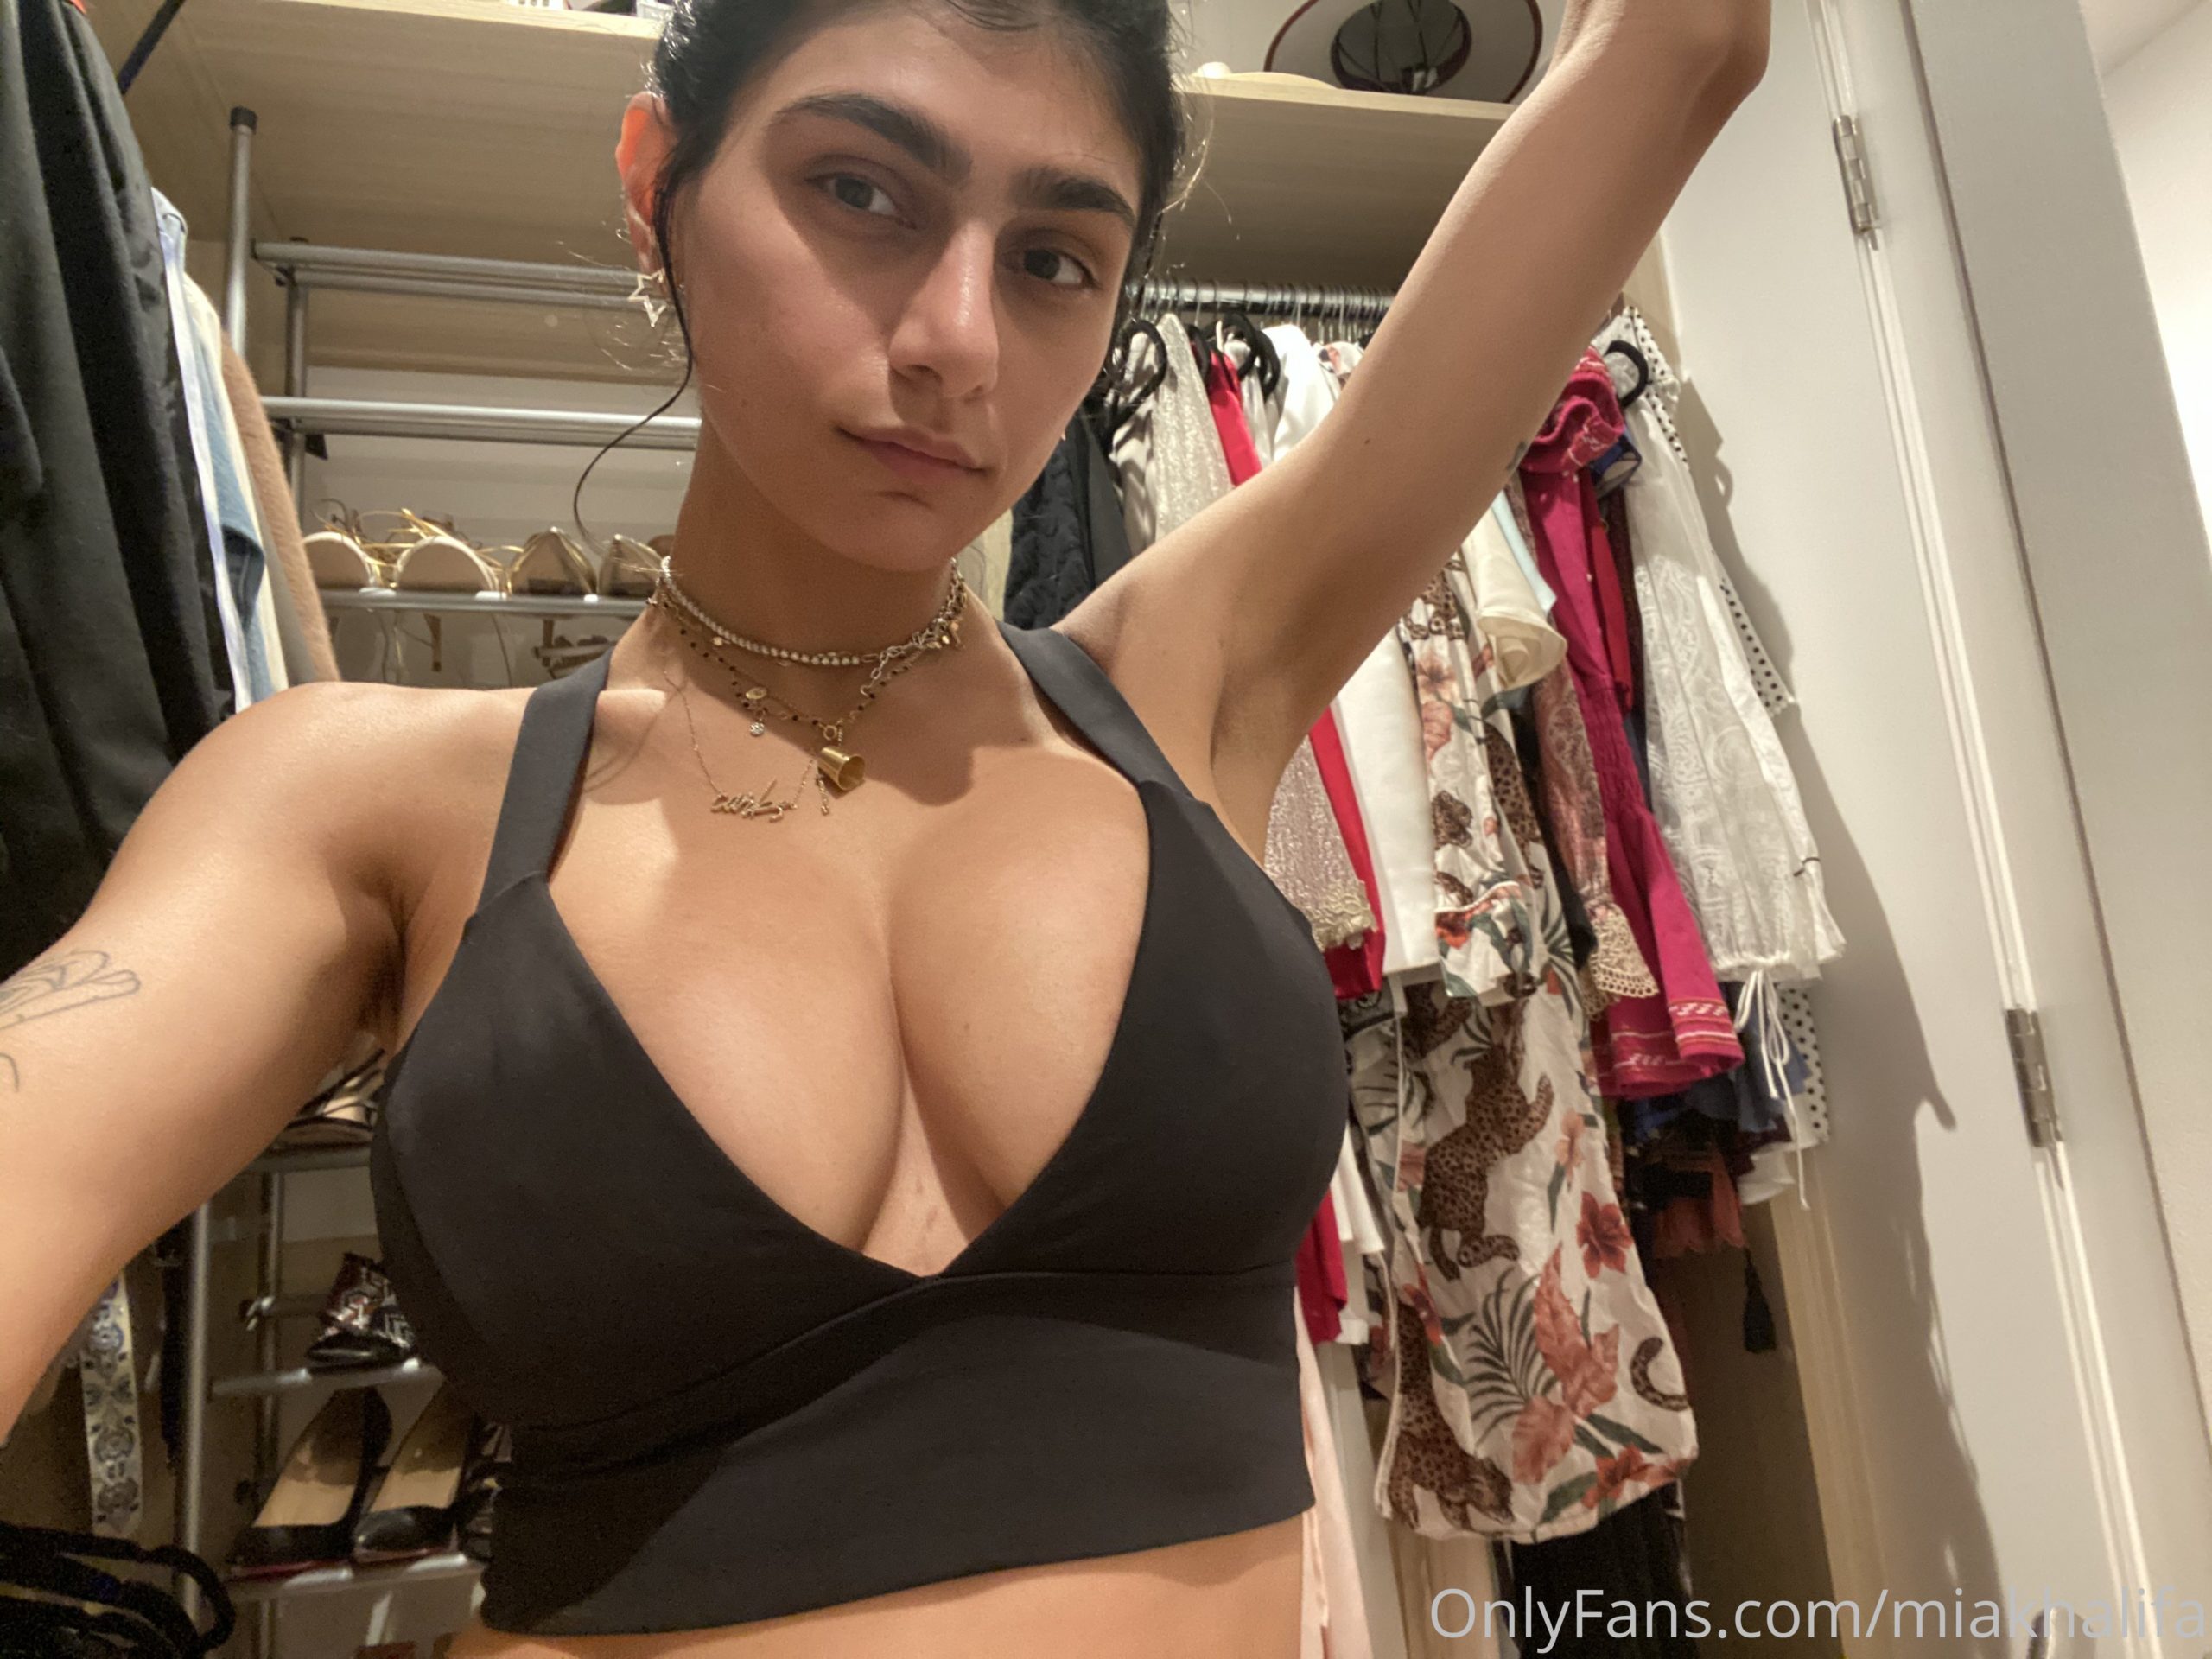 Private video Mia Khalifa Onlyfans Nudes Leaked